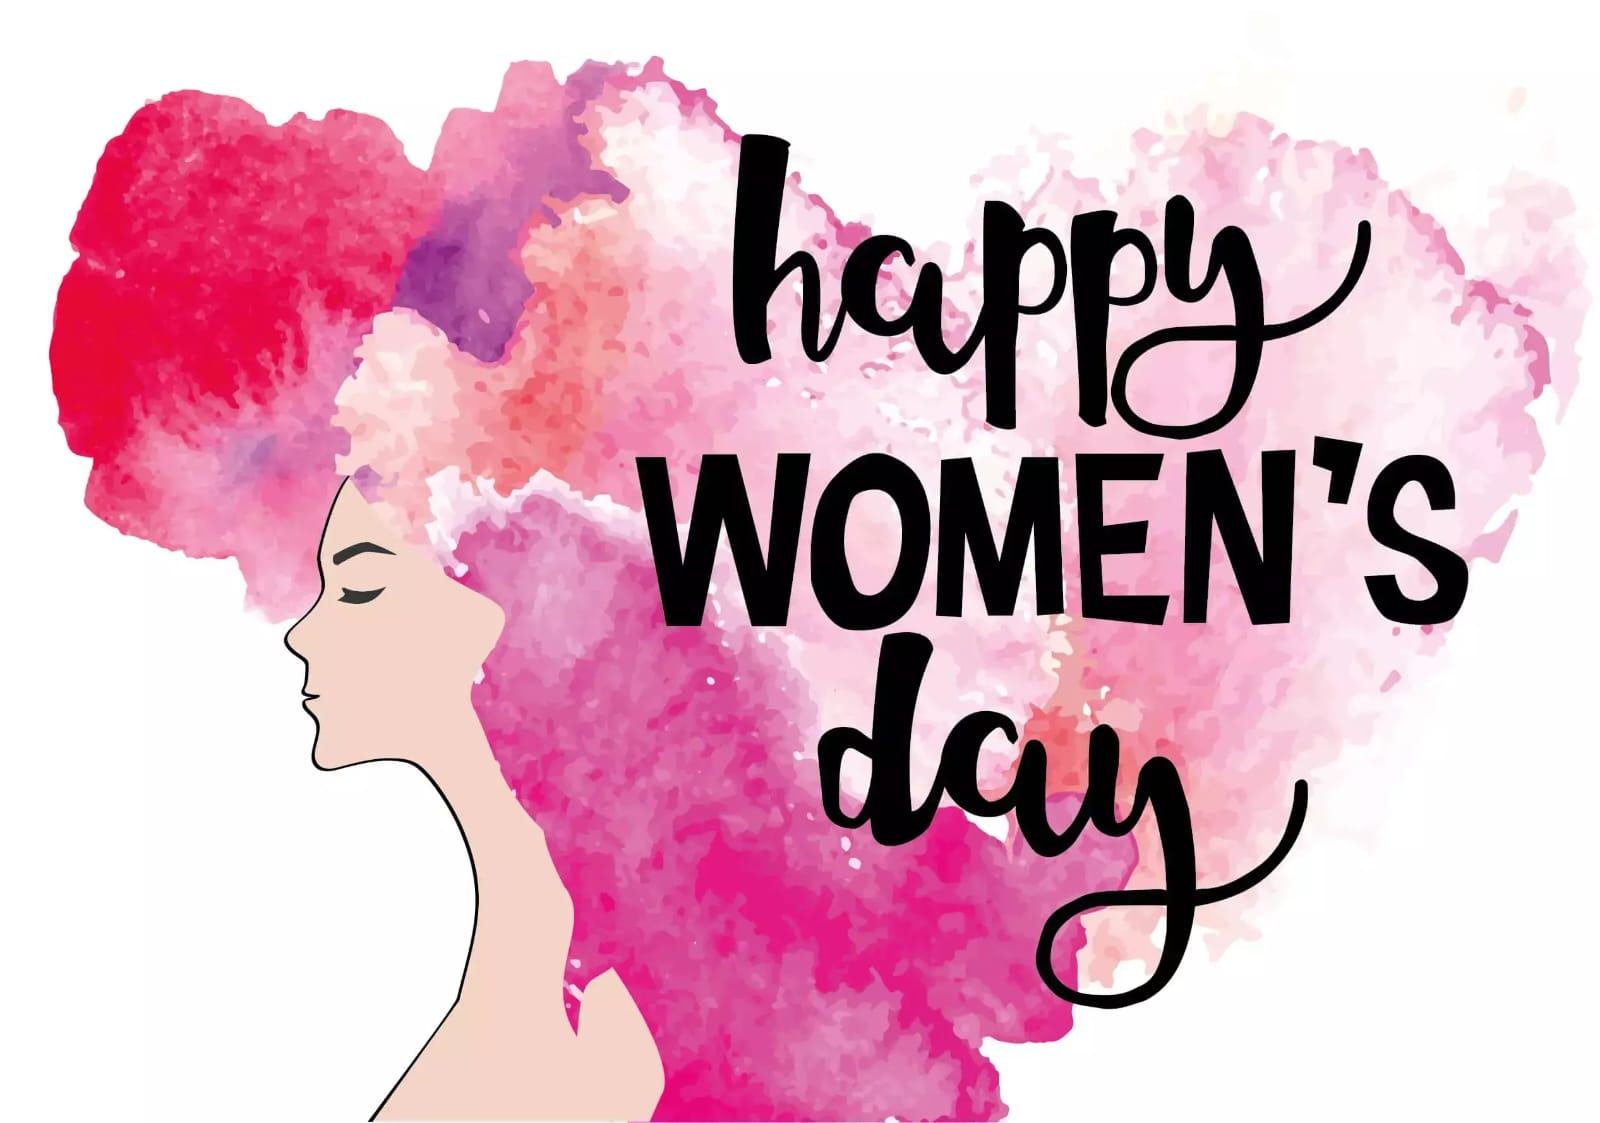 Happy women's day to all the lovely ladies 